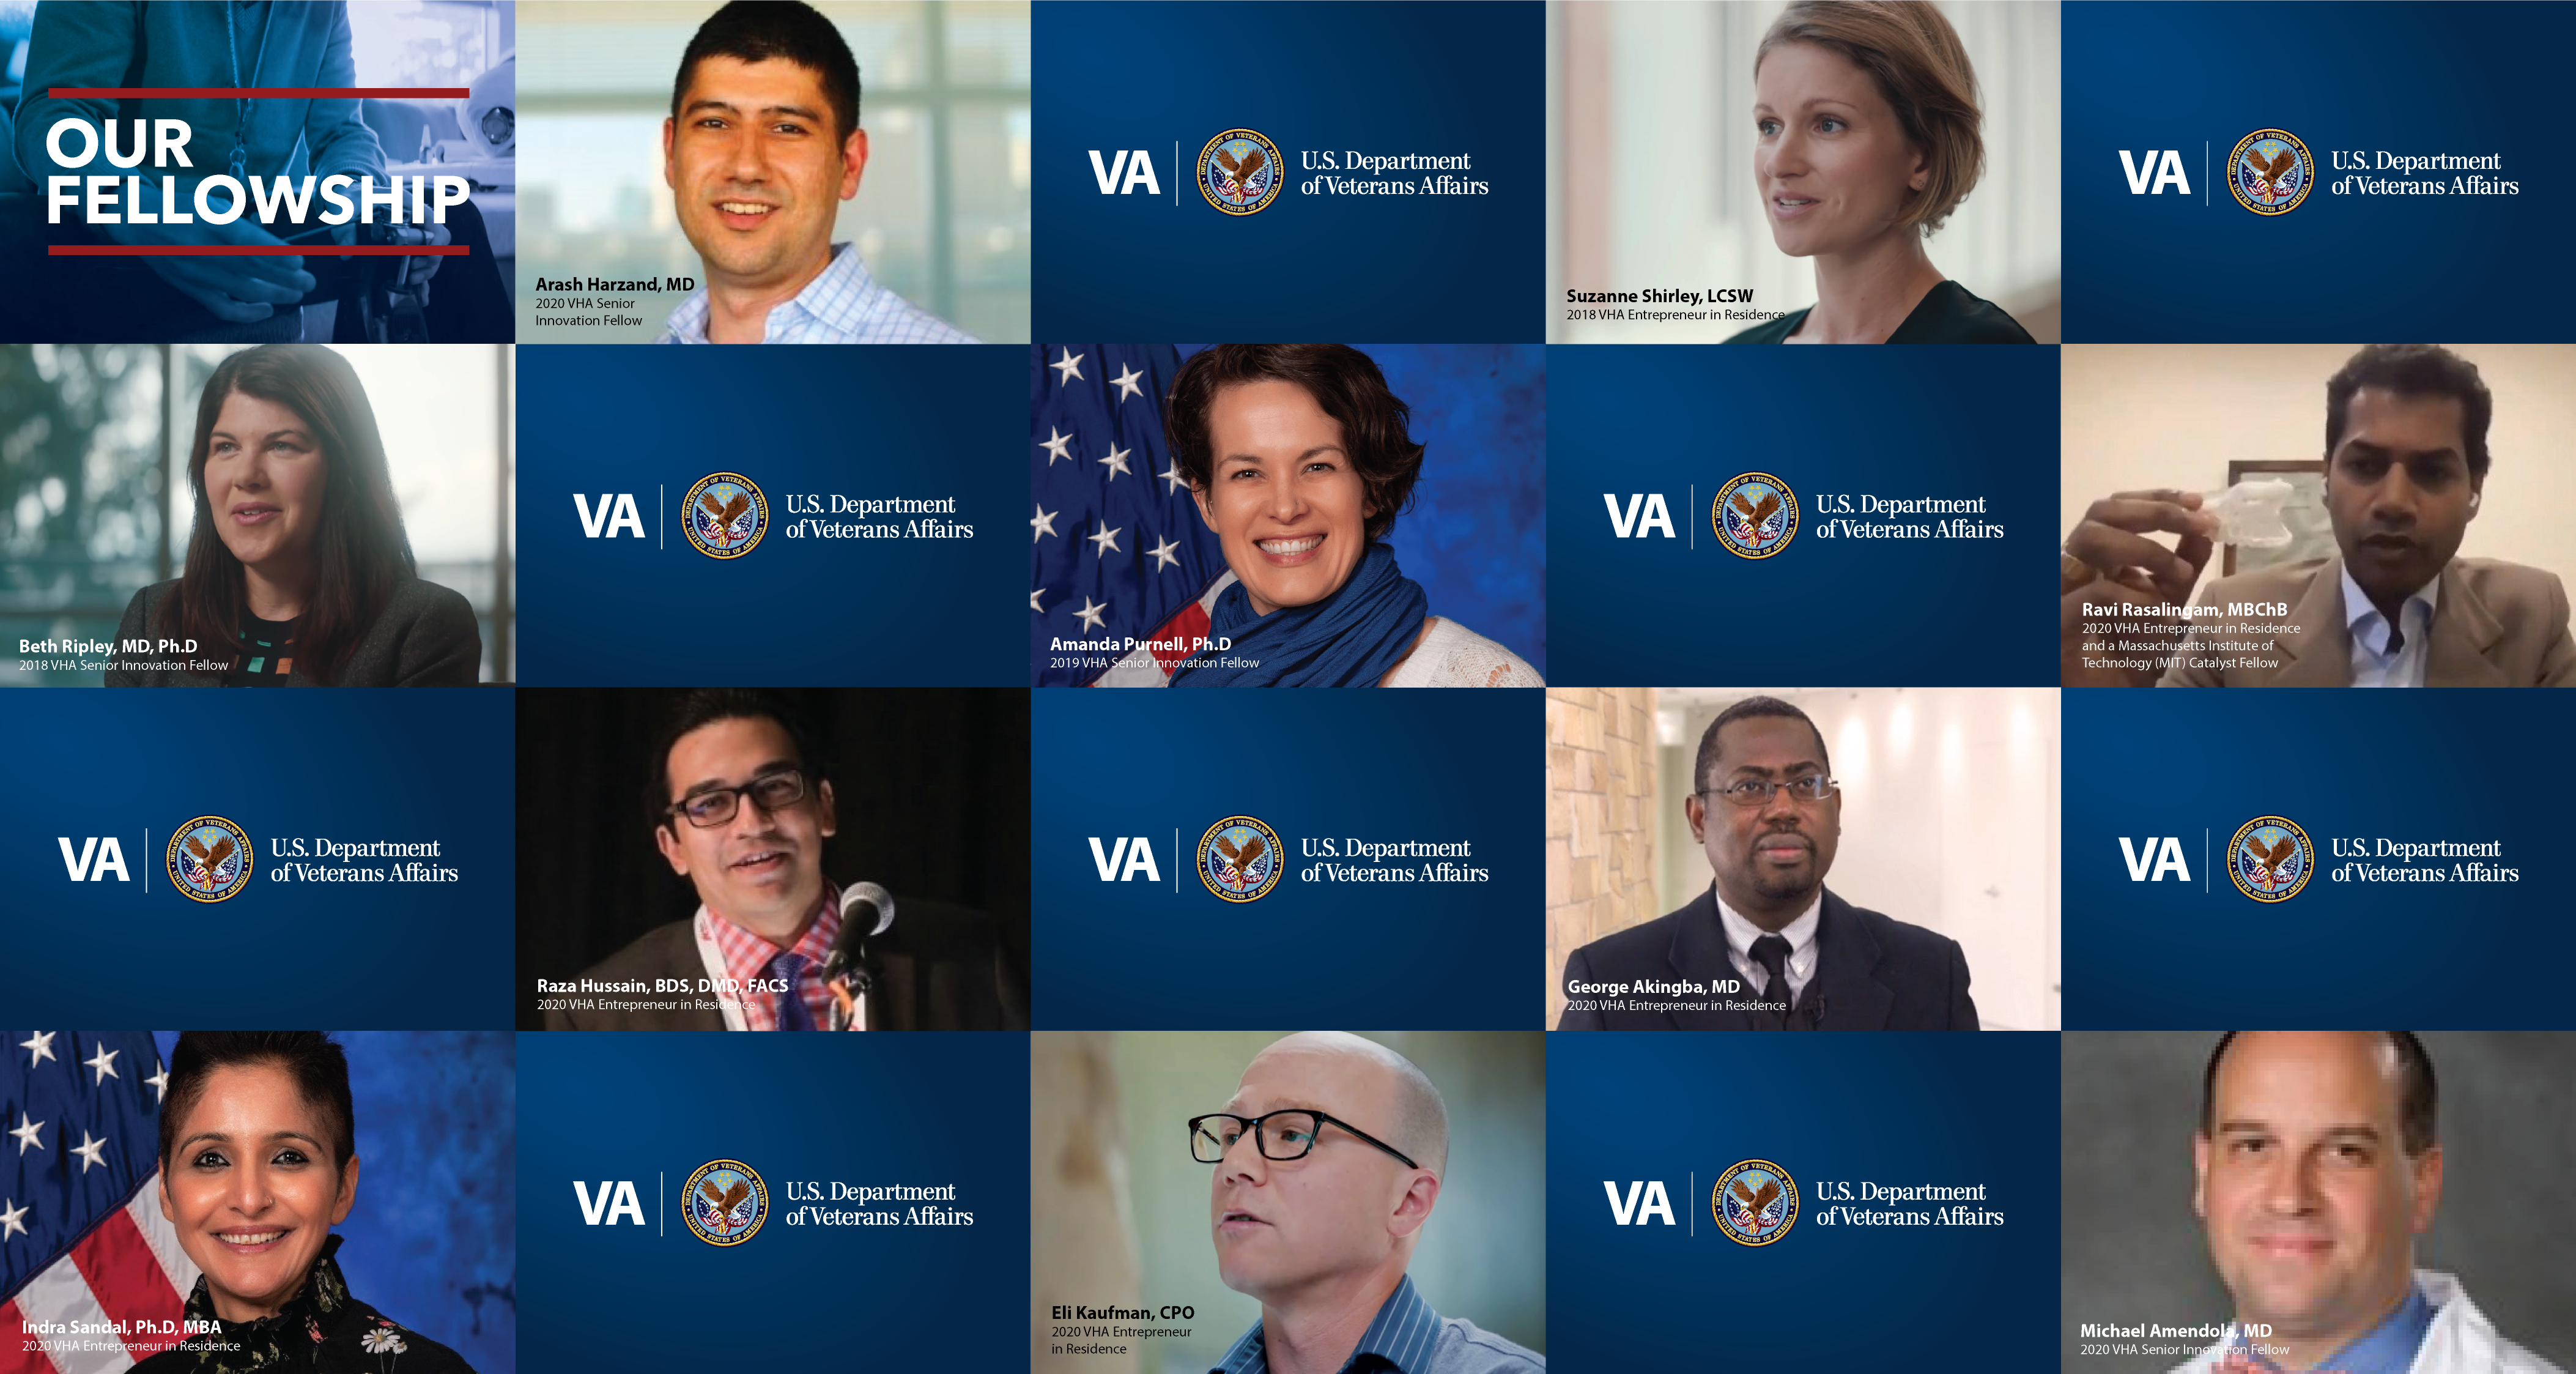 Varied faces of men and women interspersed with blue squares with the VA logo